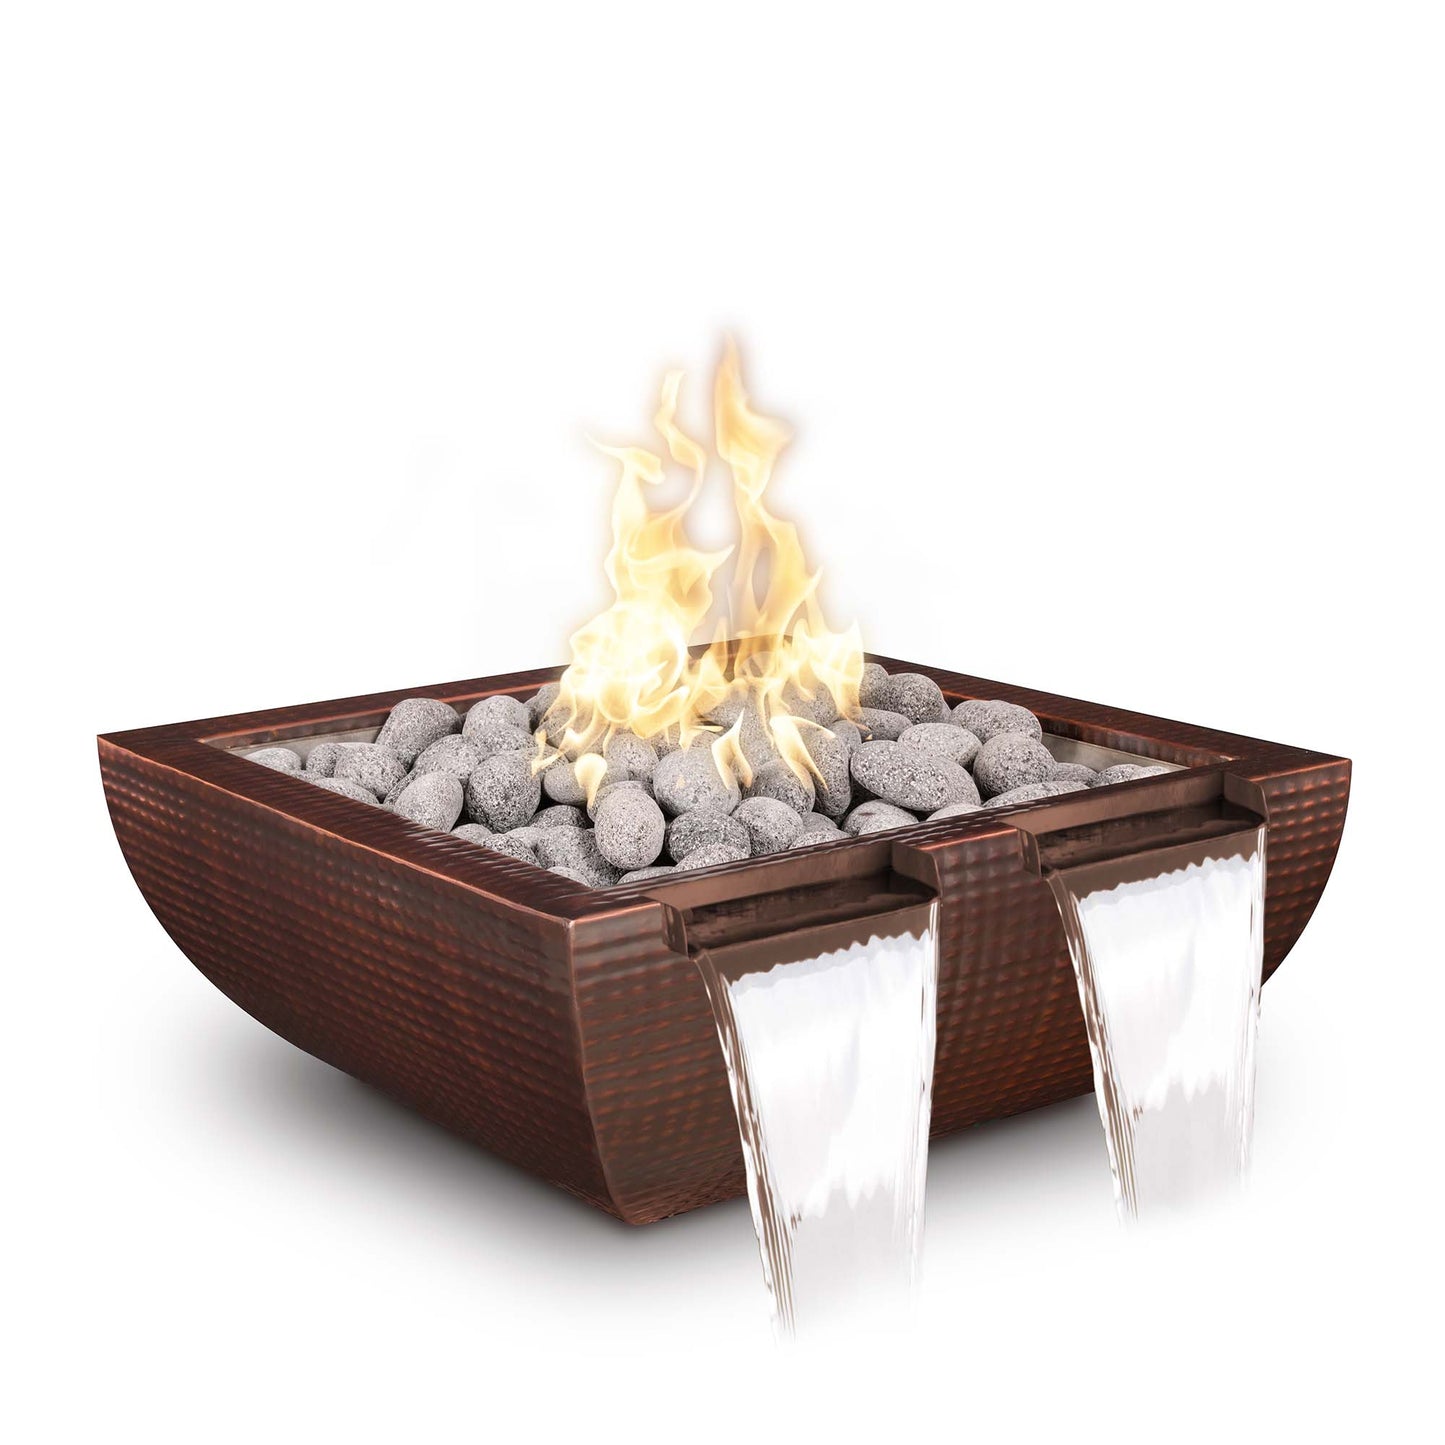 The Outdoor Plus Avalon Twin Spill 30" Java Powder Coated Metal Natural Gas Fire & Water Bowl with Match Lit Ignition